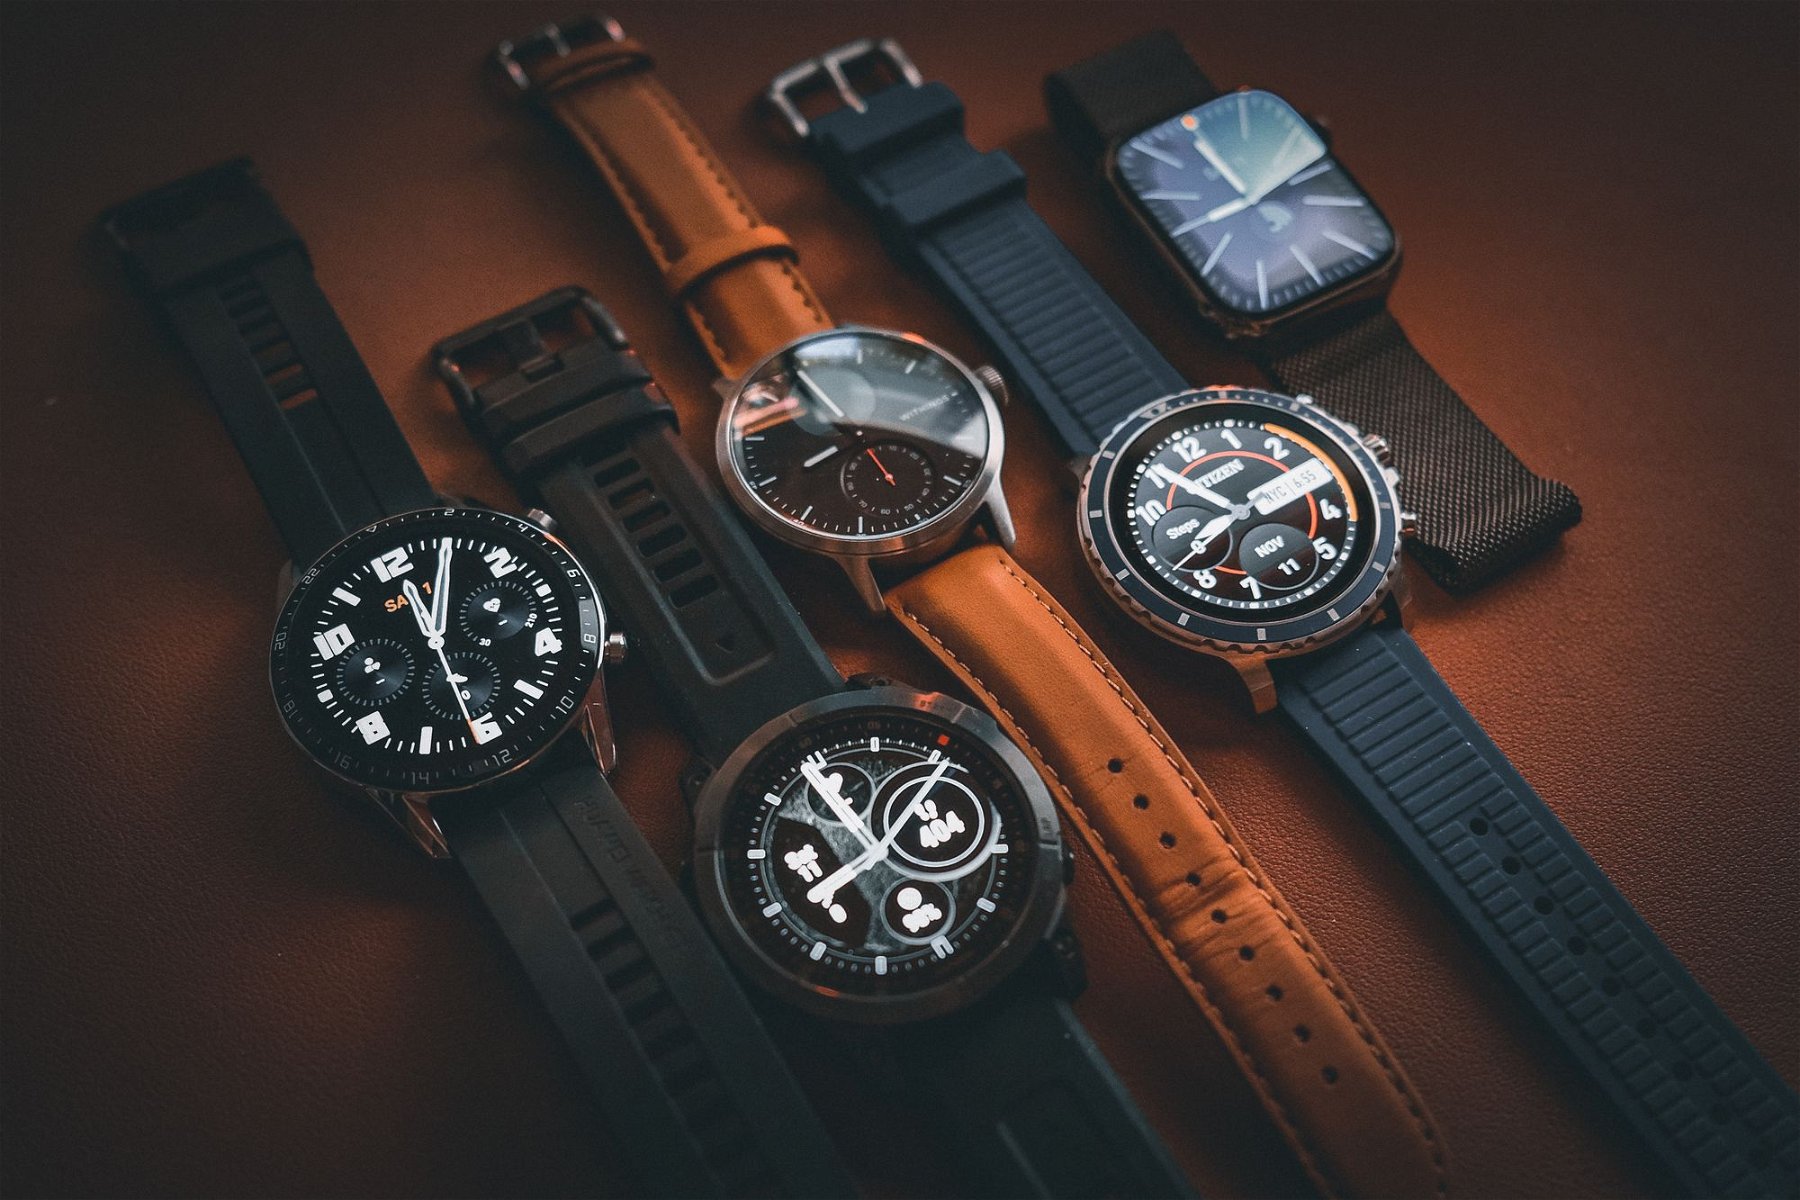 A photo of my very ordinary smartwatch collection. Taken with my Fujifilm X100V. Edited for effect in Lightroom.